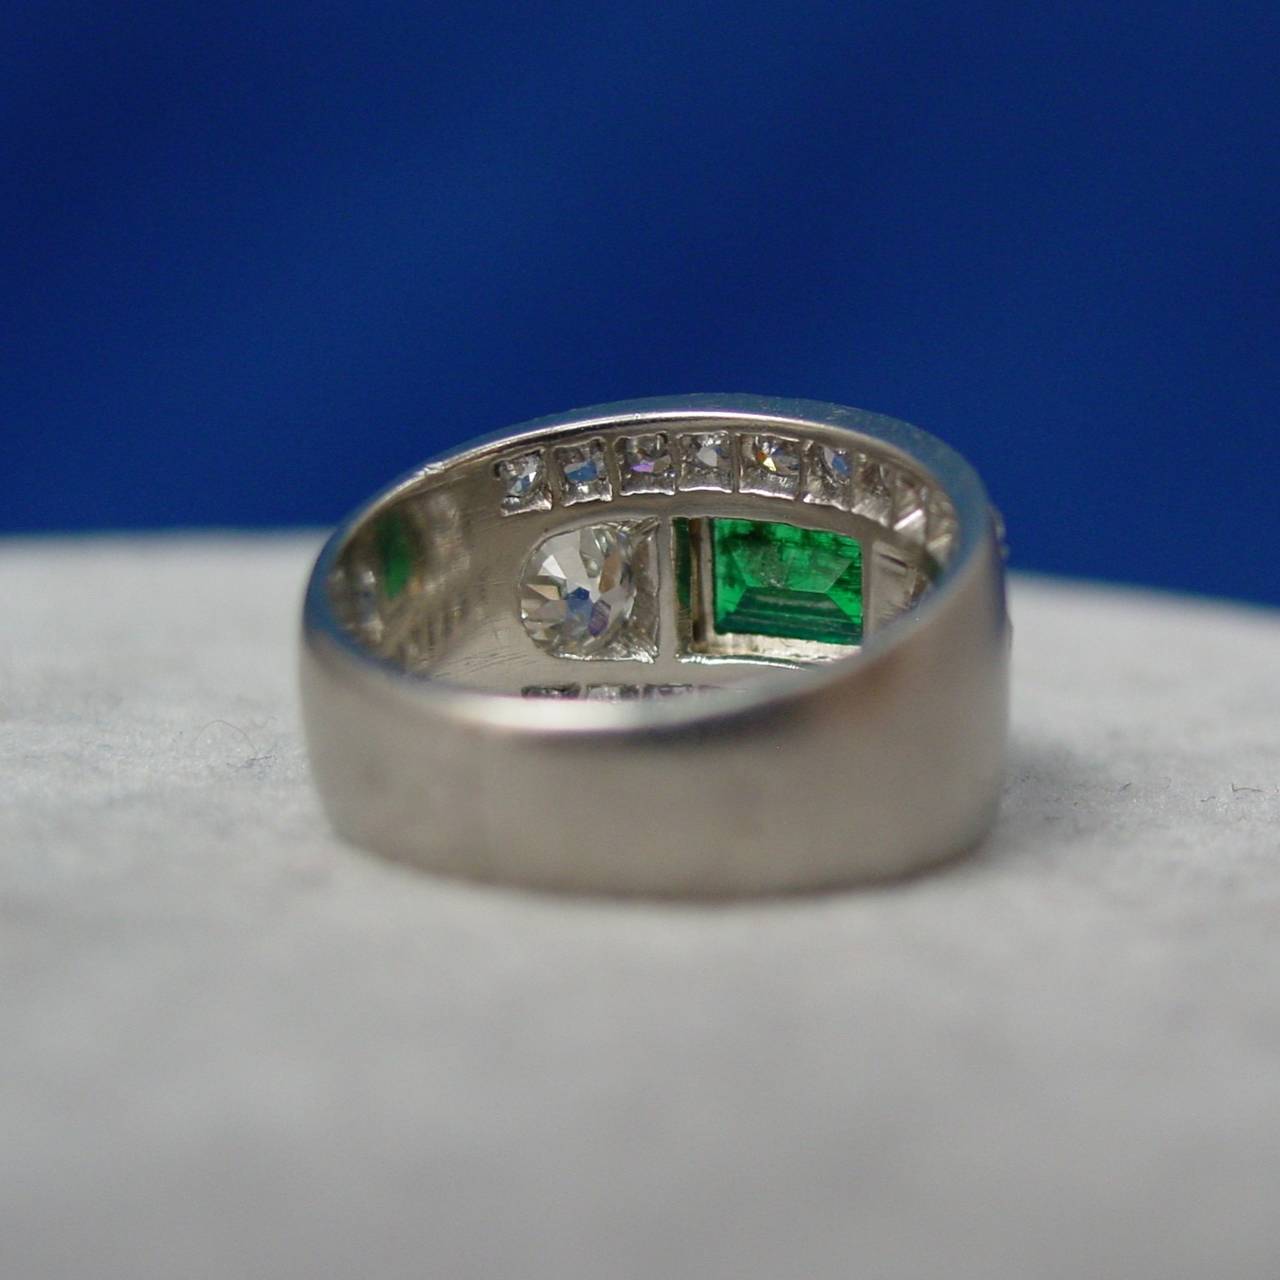 A French Art Deco Emerald and Diamond Ring, mounted in satin finished platinum. This very chic ring is set with a center rectangular cut emerald, flanked by two European cut diamonds within two rows of diamonds, also European cuts. The emerald